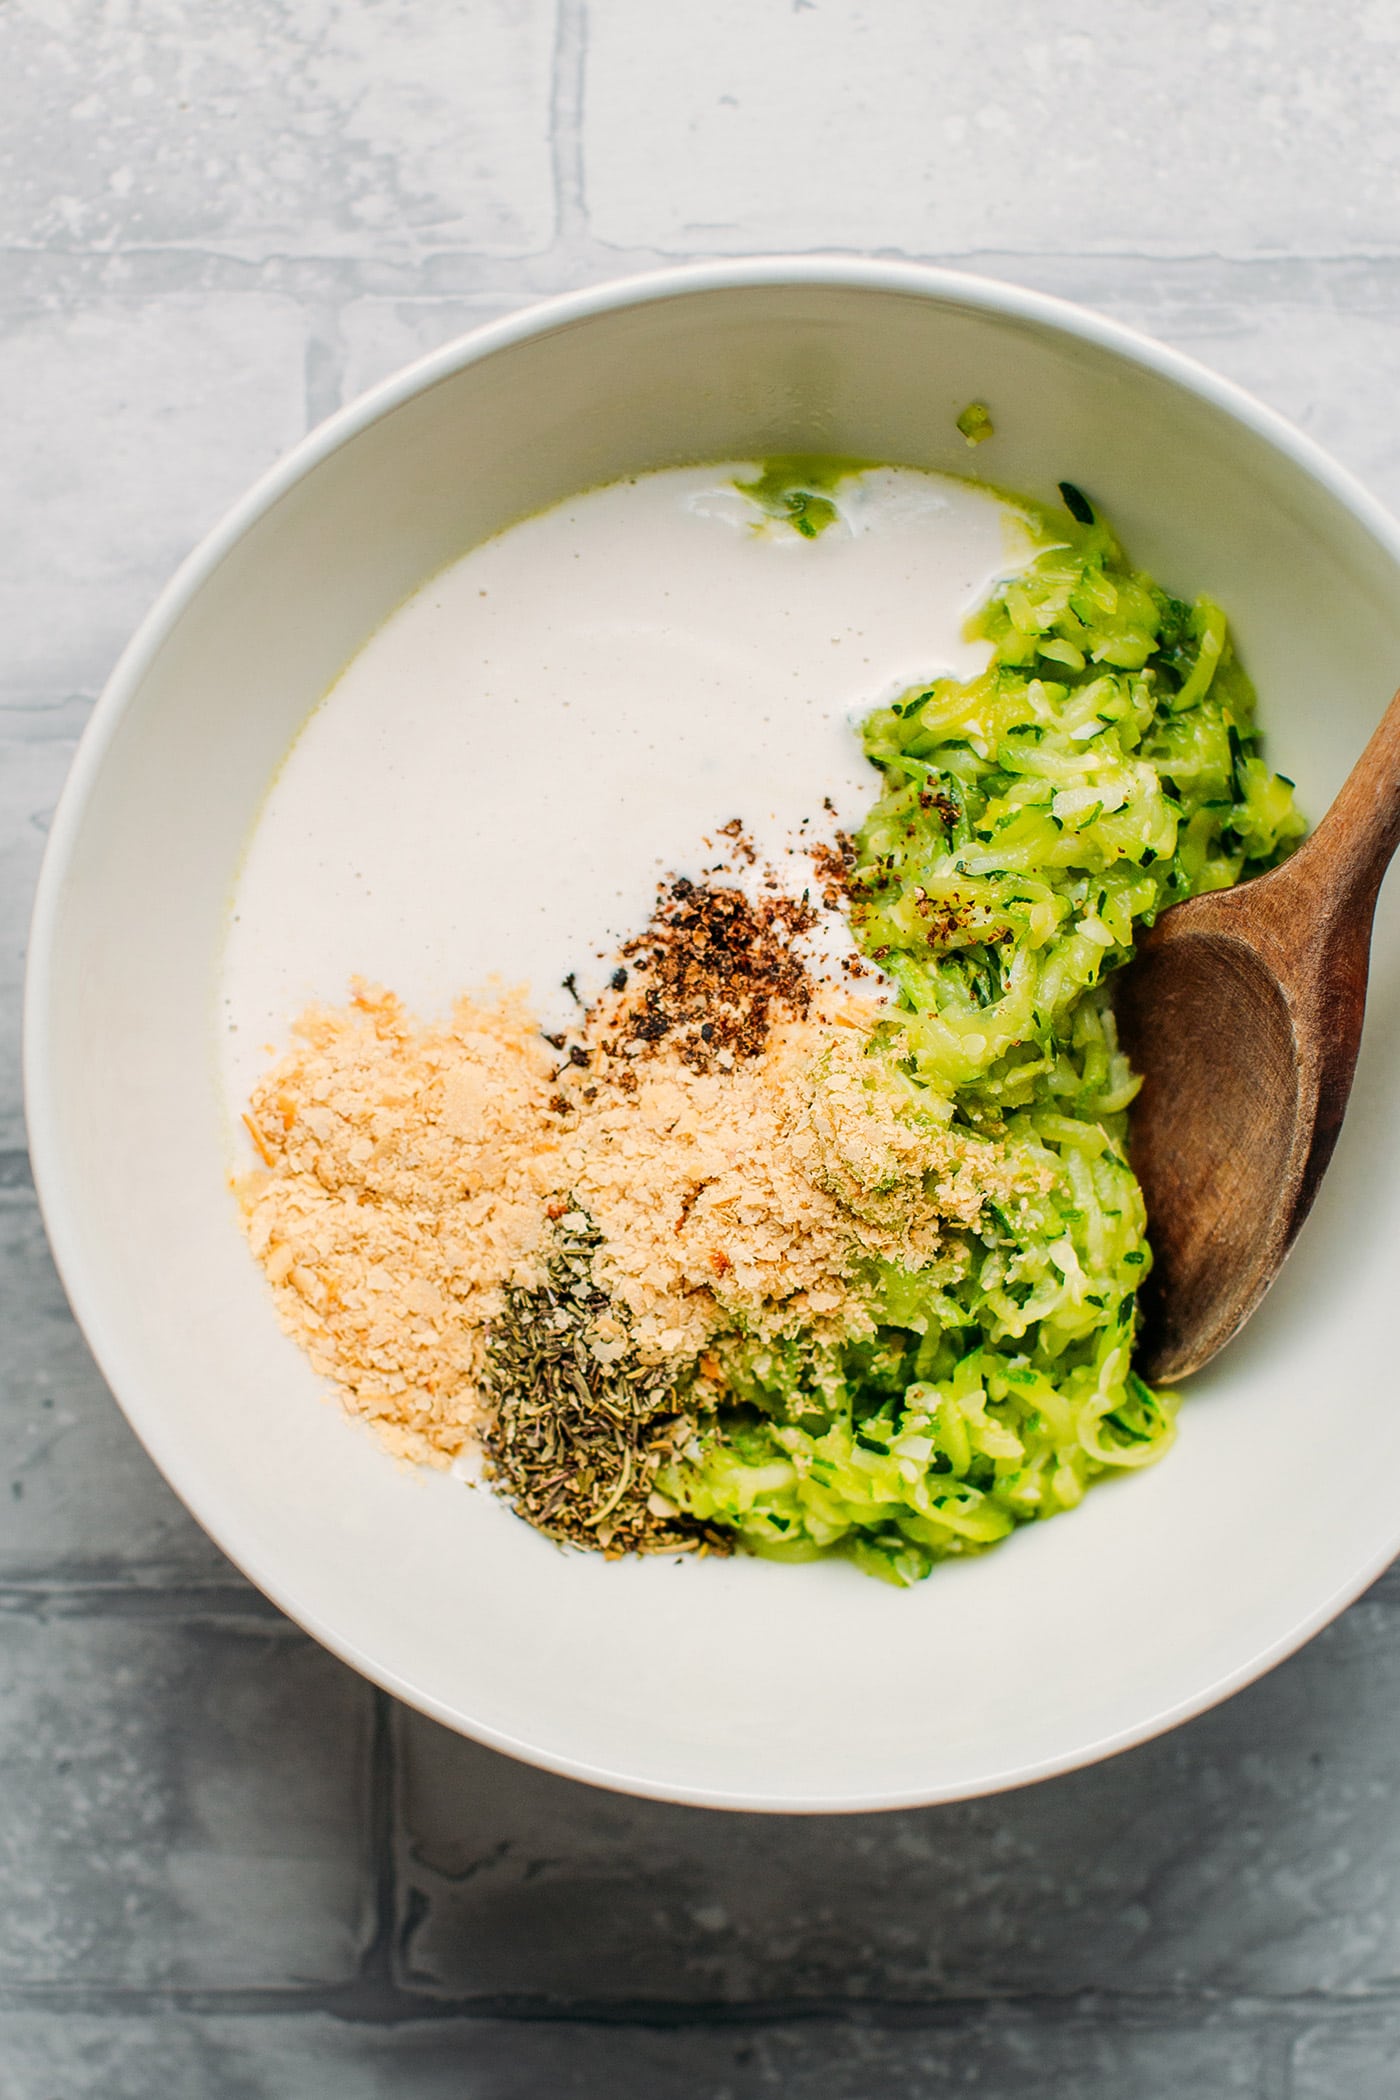 Zucchini, nutritional yeast, and cashew cream in a bowl.